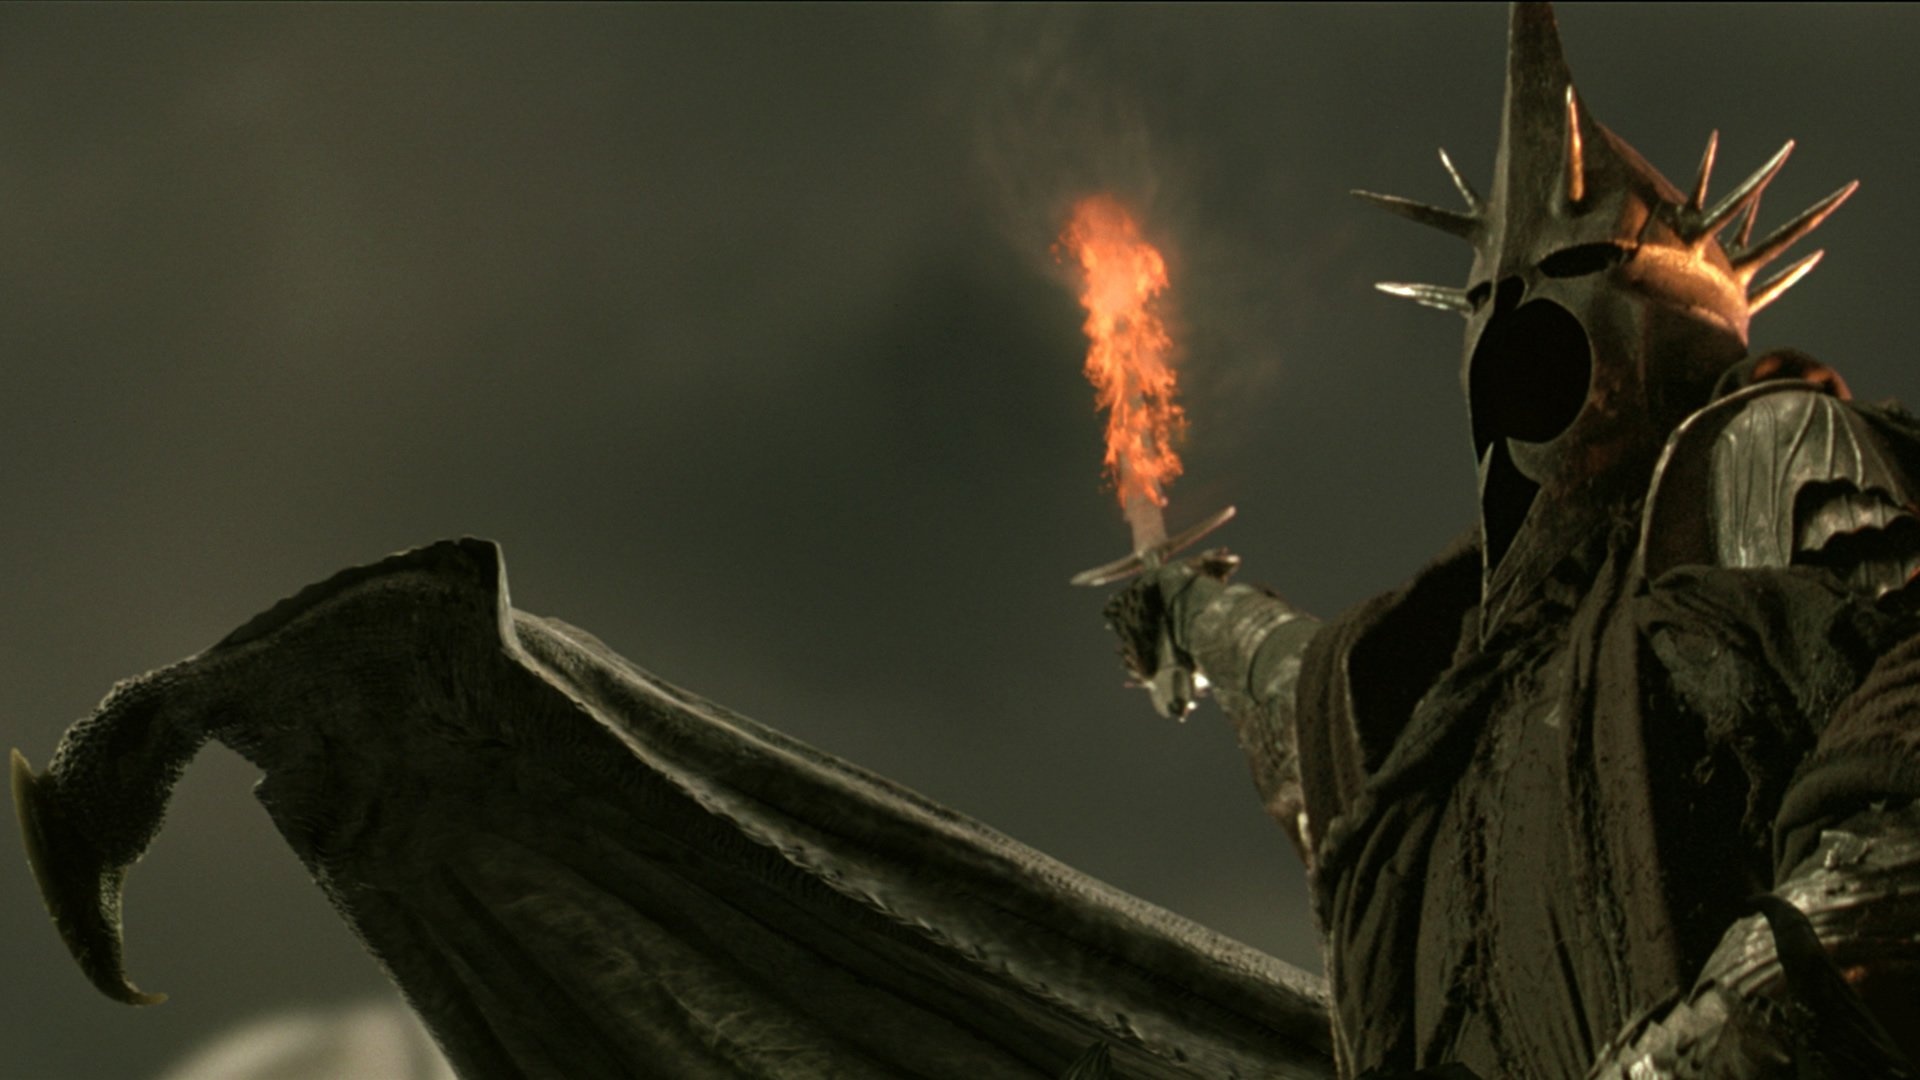 The Return of the King: The Lord of the Nazgul, Sauron's great captain. 1920x1080 Full HD Background.